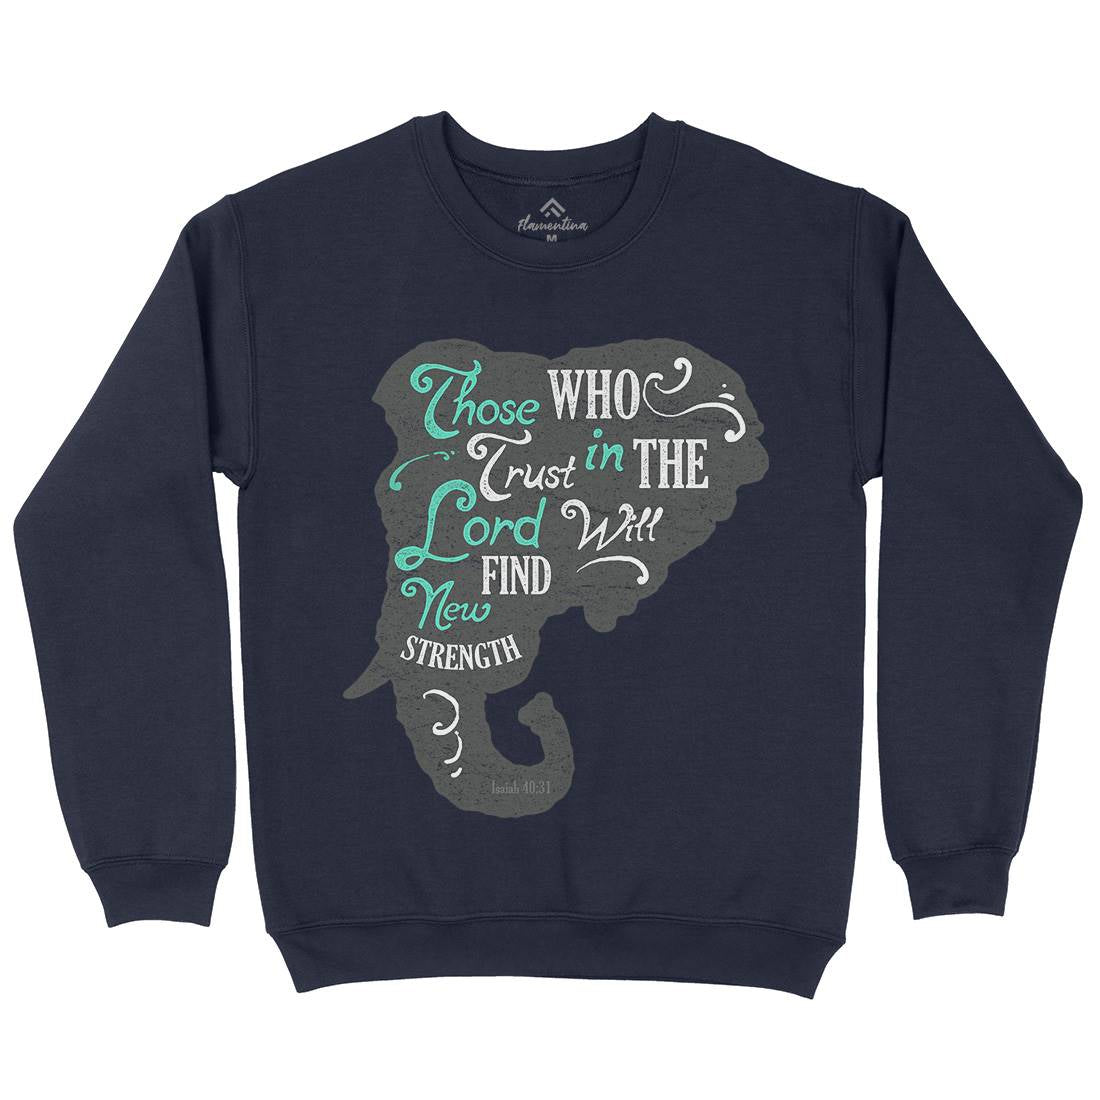 Trust In The Lord Kids Crew Neck Sweatshirt Religion A390